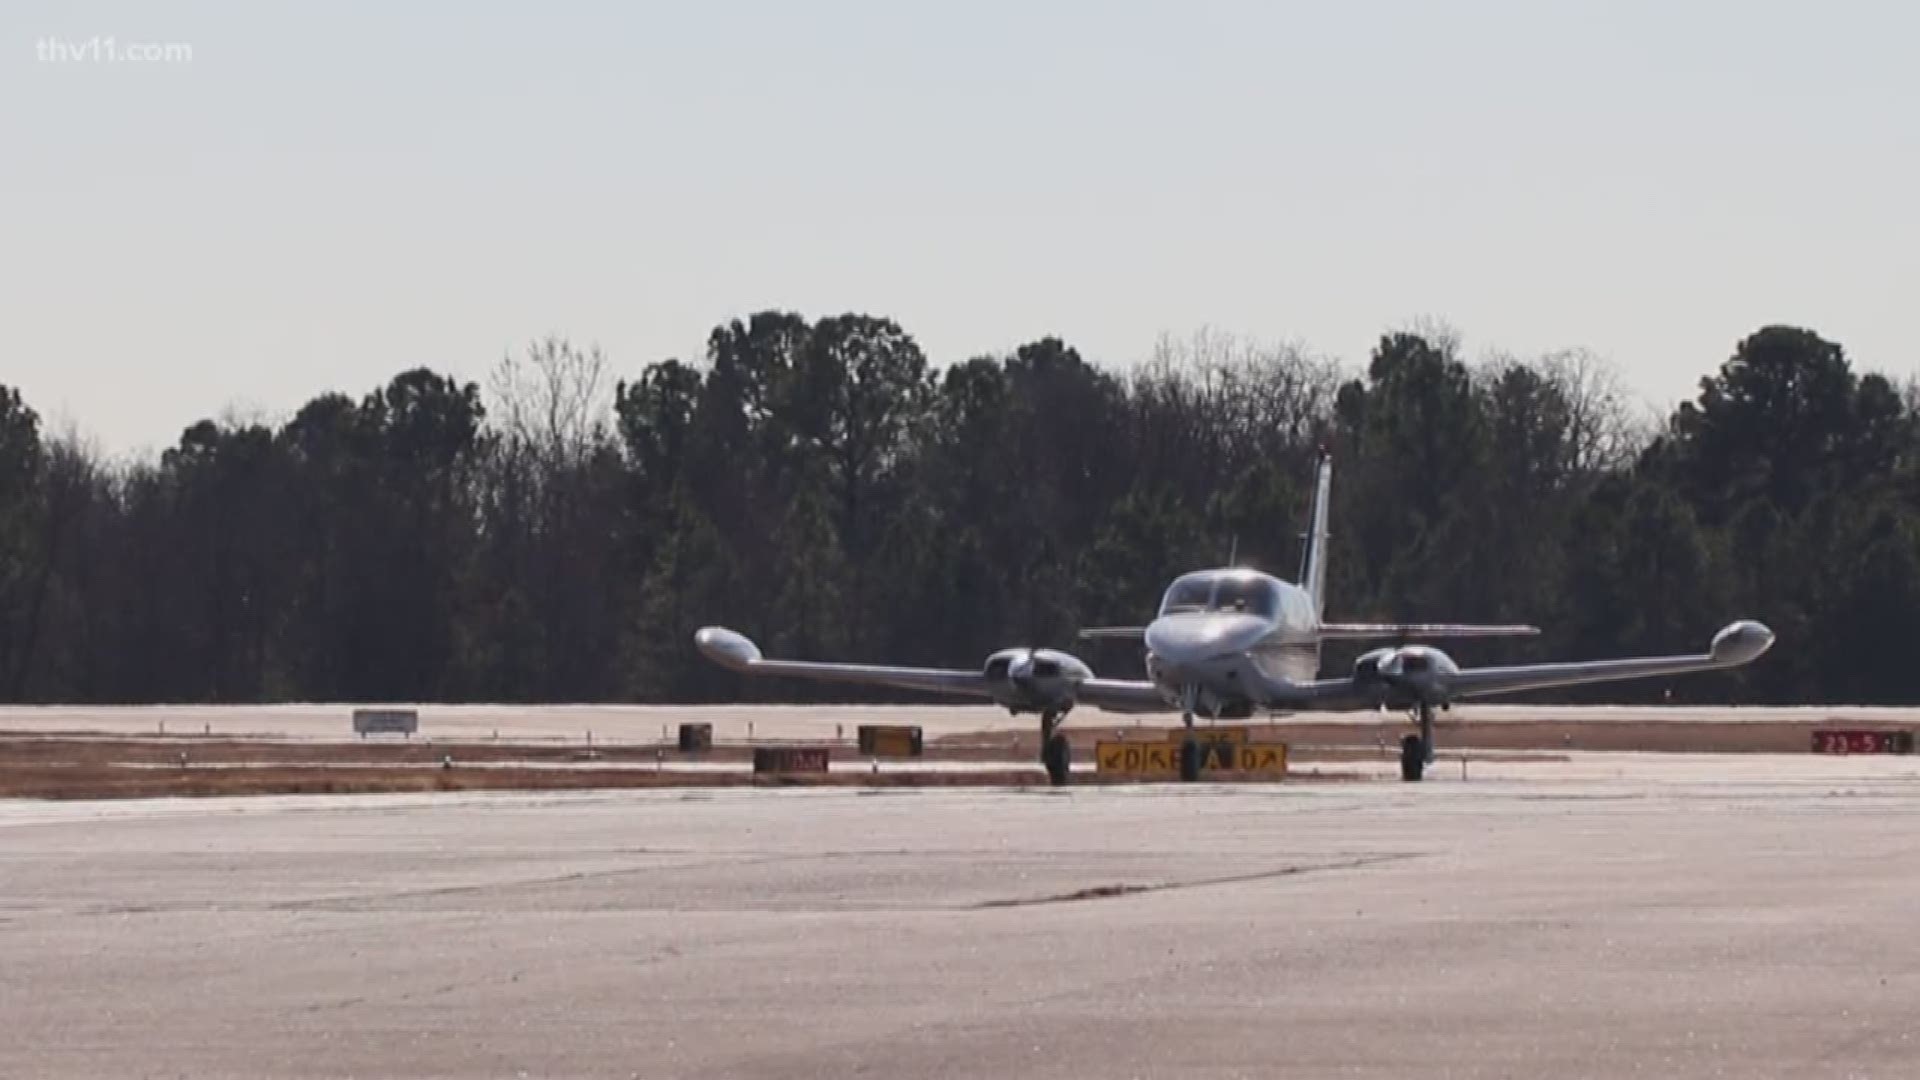 There's an entire group of pilots in Arkansas who are stepping up to fly around Arkansas and save lives.